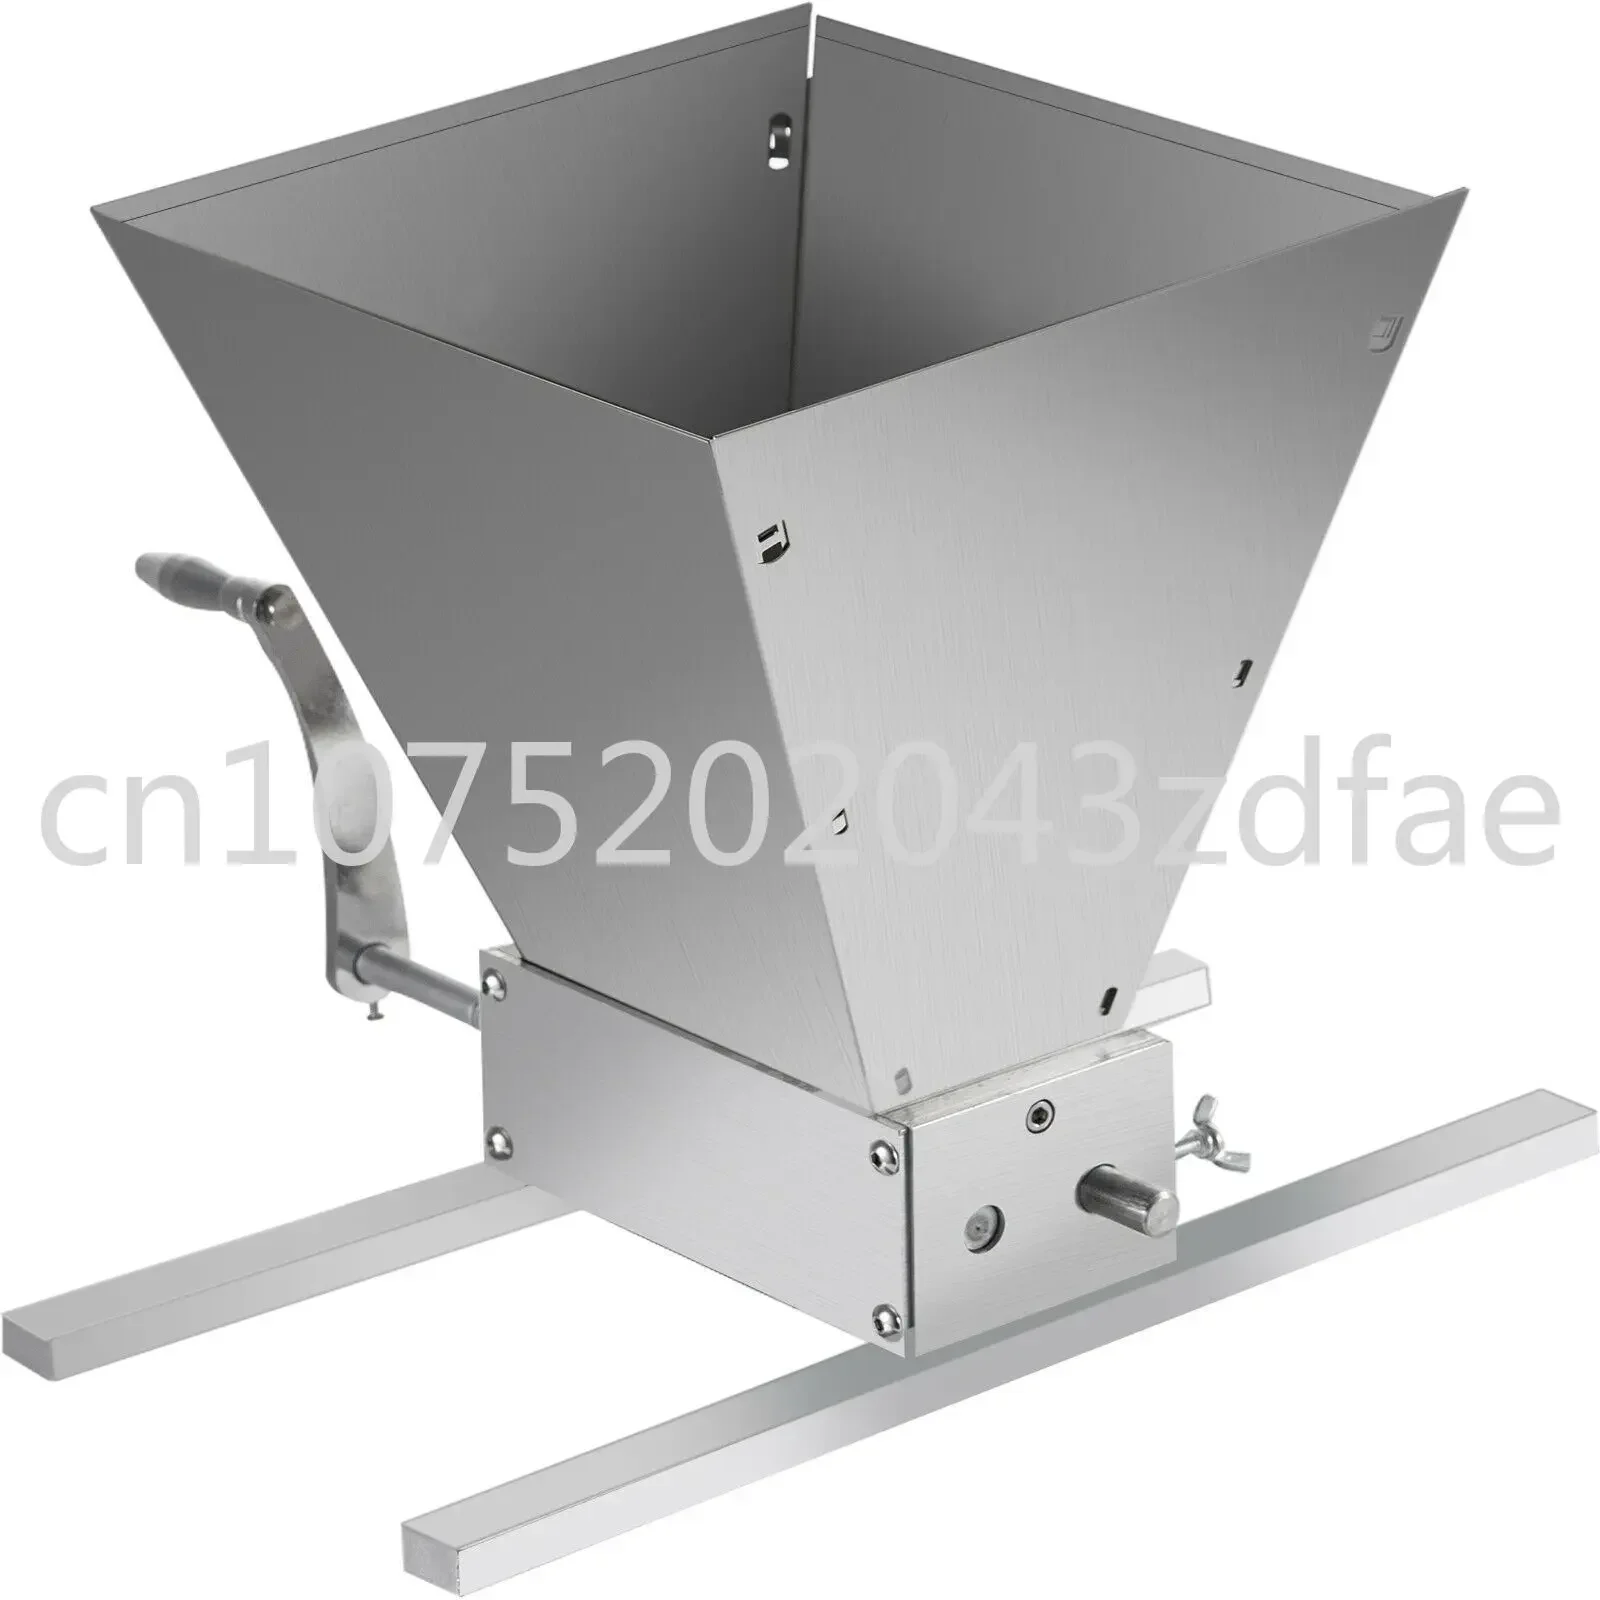 

DY-168 Wheat Malt Crusher Stainless Steel Grain Crusher Be Suitable For Crushing Malt, Barley And Wheat